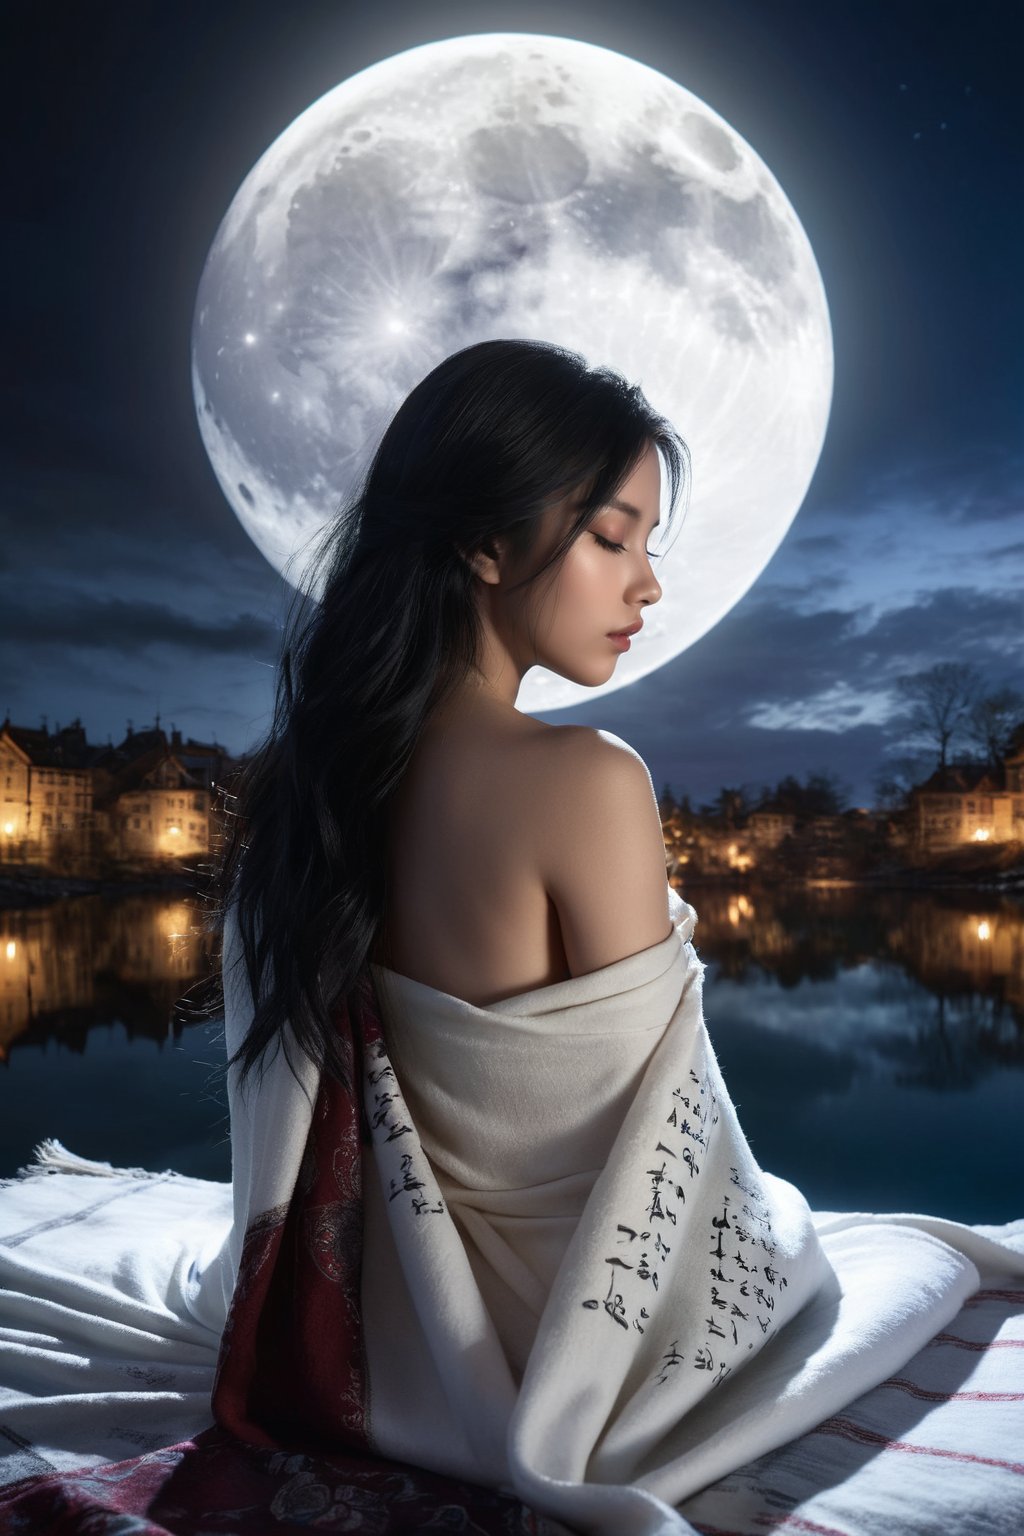 Double Exposure Style, Volumetric Lighting, arching her back, Traditional Attire, Artistic Calligraphy and Ink, light depth, dramatic atmospheric lighting, image combination, fantasy art, , (a blanket:1.3), a girl, black-hair , (naked, nude, )sleeping, looking a the moon, it is in a Witcher setting, lake and cityscape, ruined city, Fantasy, Back lighting, Colorful, Moon, dreamy magical atmosphere,HUBGGIRL,1girl, Extremely beautiful girl,
